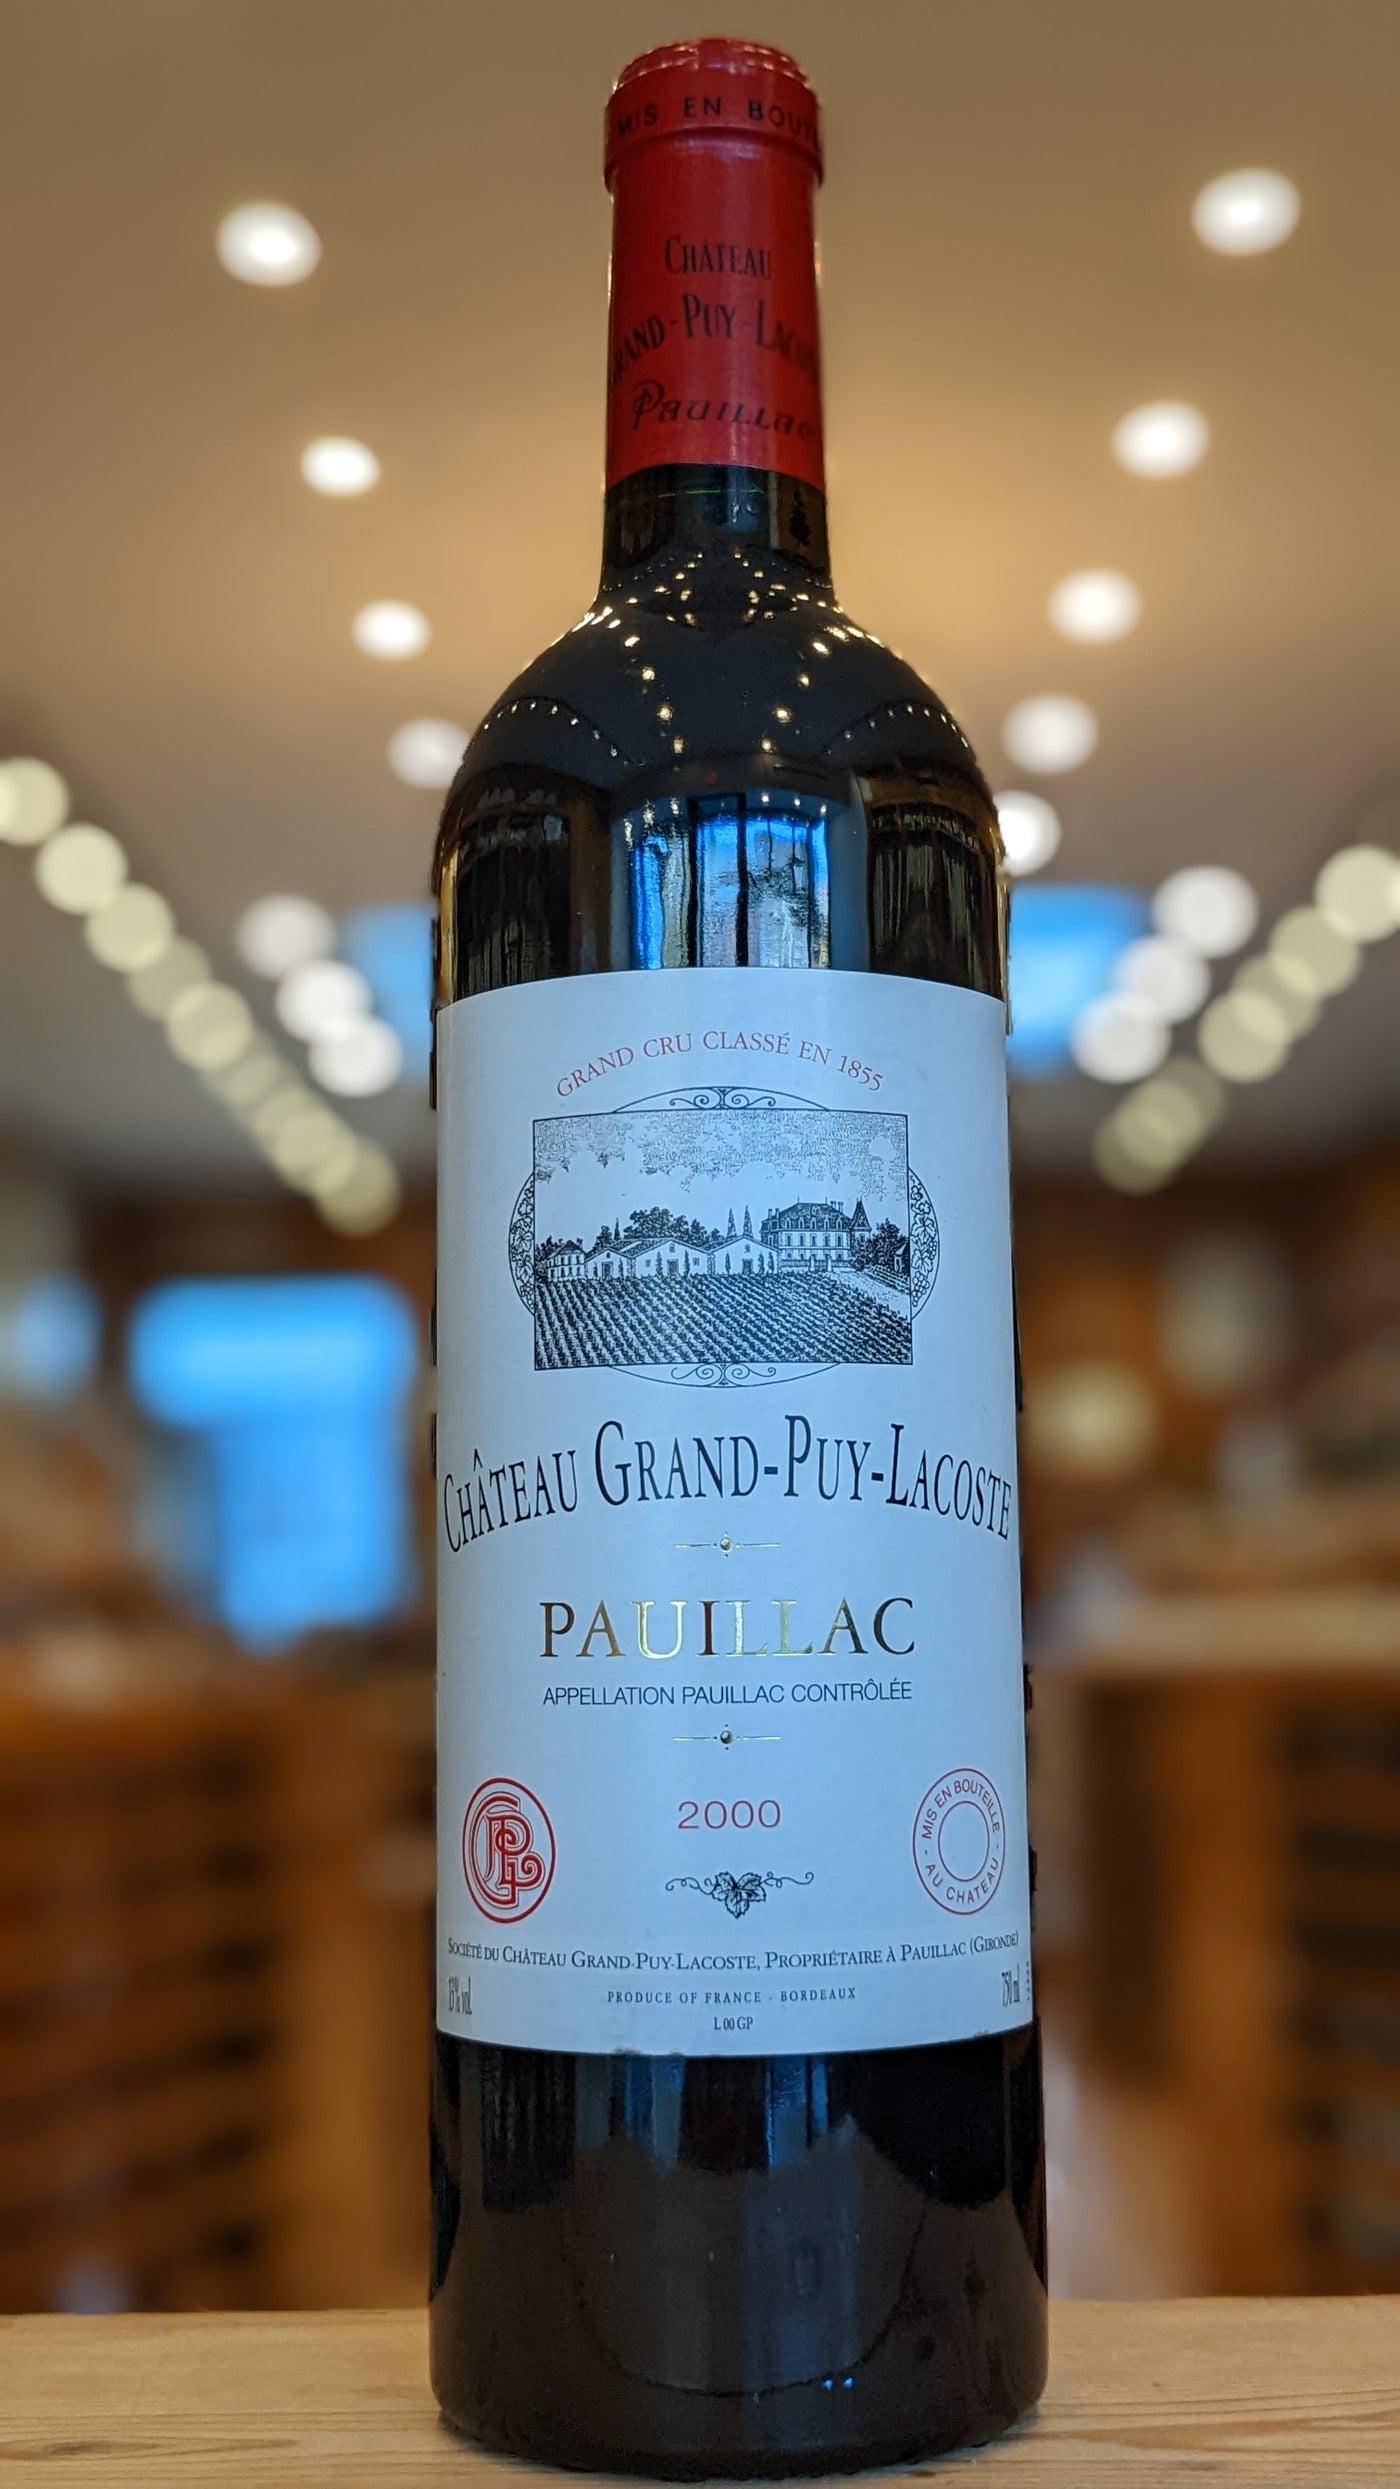 Chateau Grand-Puy-Lacoste Pauillac 2000